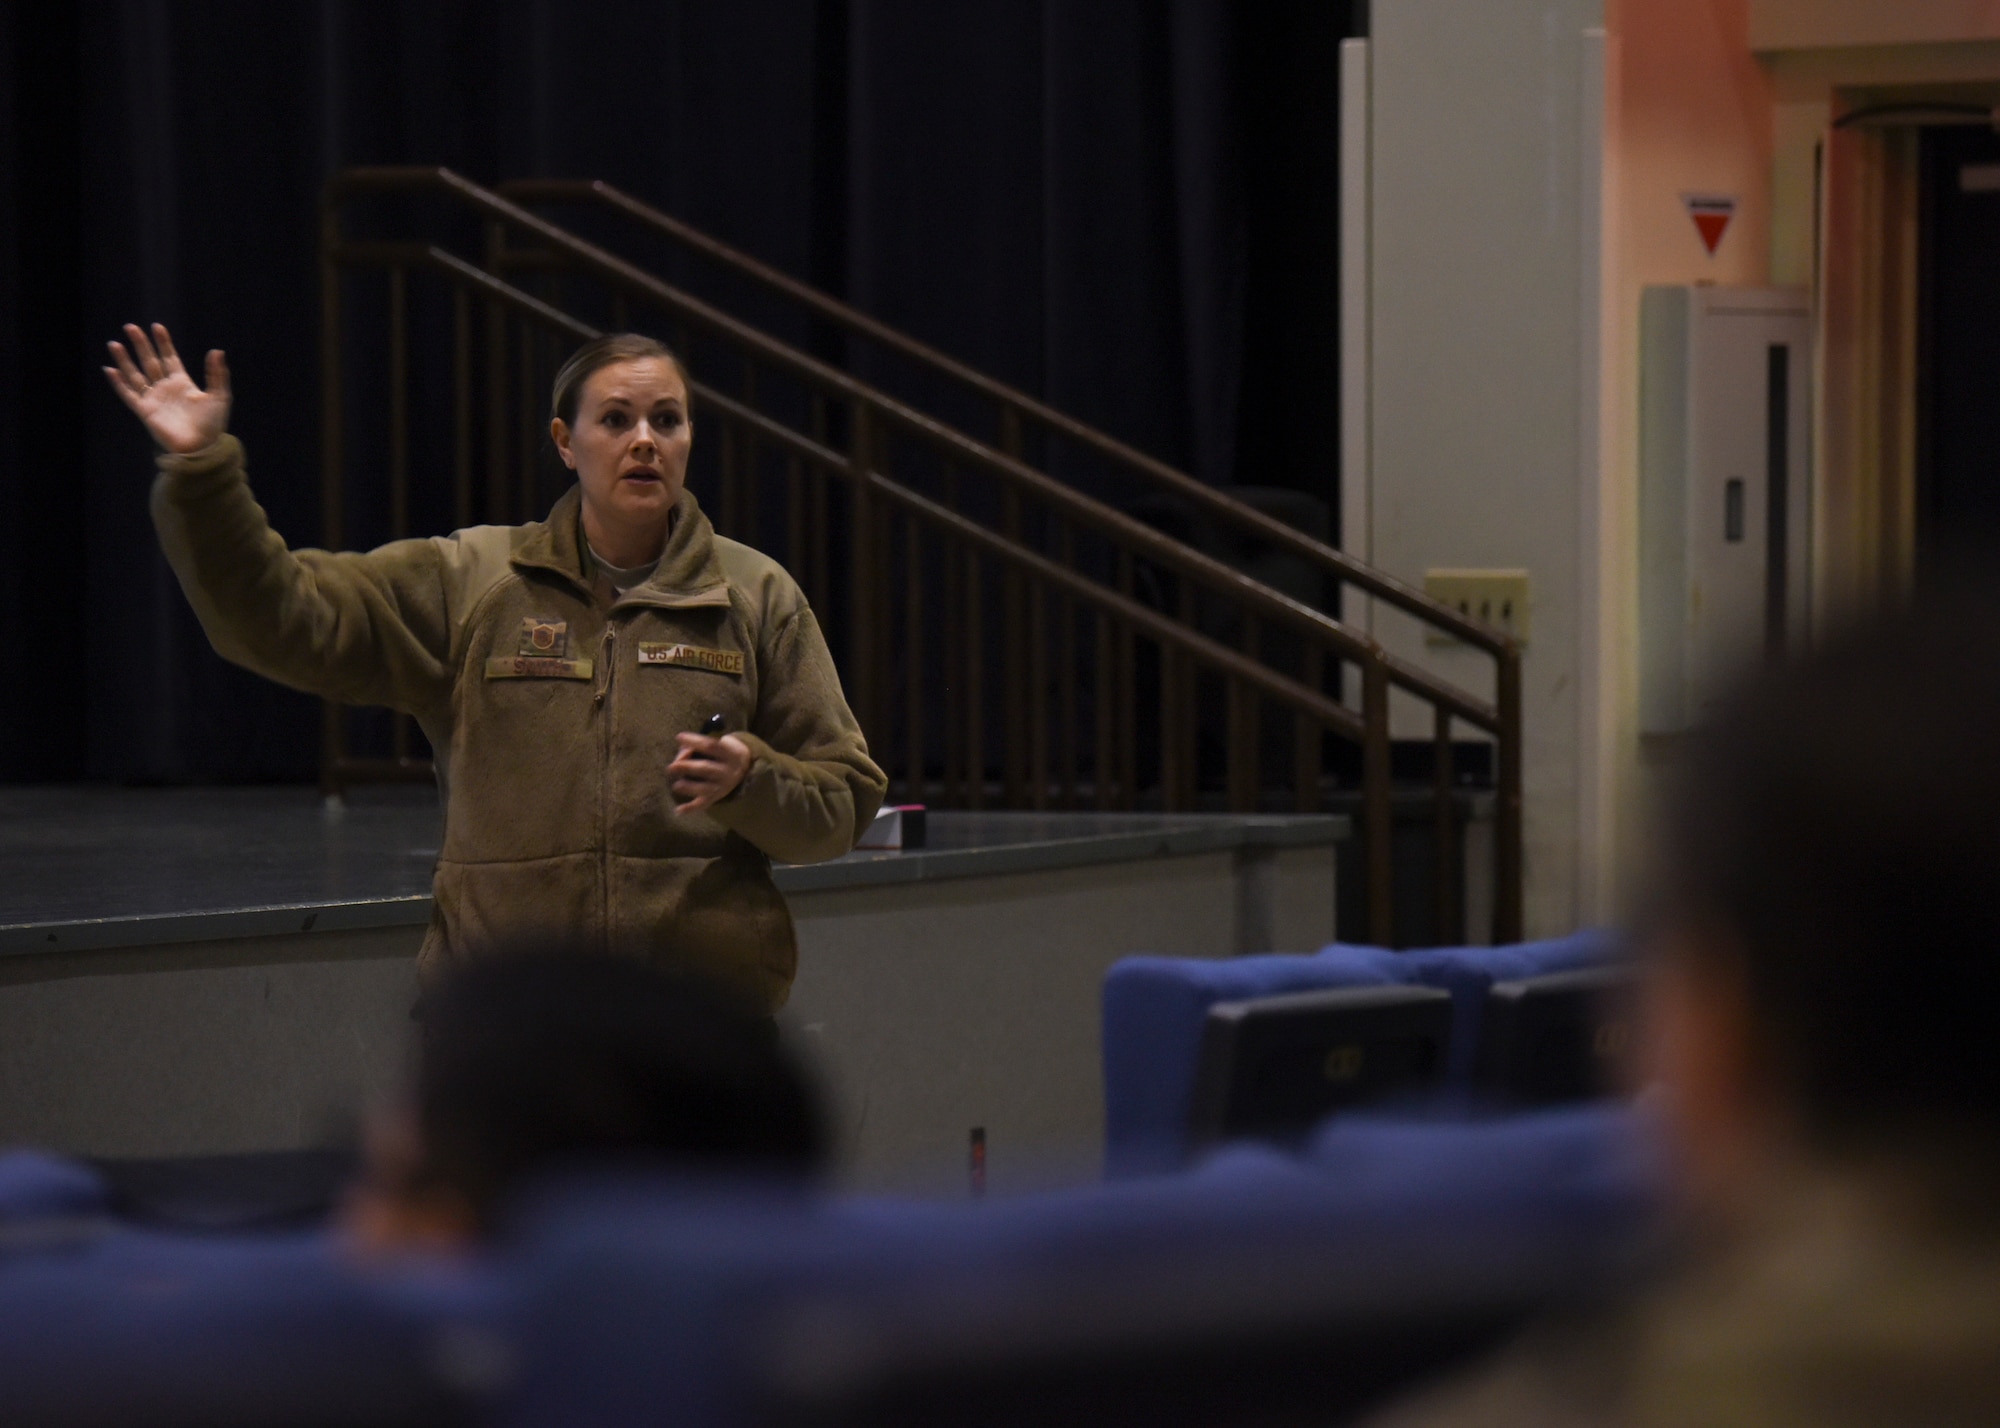 U.S. Air Force Master Sgt. Megan Smith, 8th Fighter Wing Equal Opportunity director, engages with a group of Airmen during the Korea Readiness Orientation about her office’s role at Kunsan Air Base, Republic of Korea, Nov. 26, 2019. The EO office supports more than 2,500 Wolf Pack members, both military and civilian. They ensure each service member is treated fairly, regardless of their race, color, religion, national origin, sex, gender identity, sexual orientation, age, genetic information, disability, or prior equal employment opportunity activity. (U.S. Air Force photo by Staff Sgt. Anthony Hetlage)